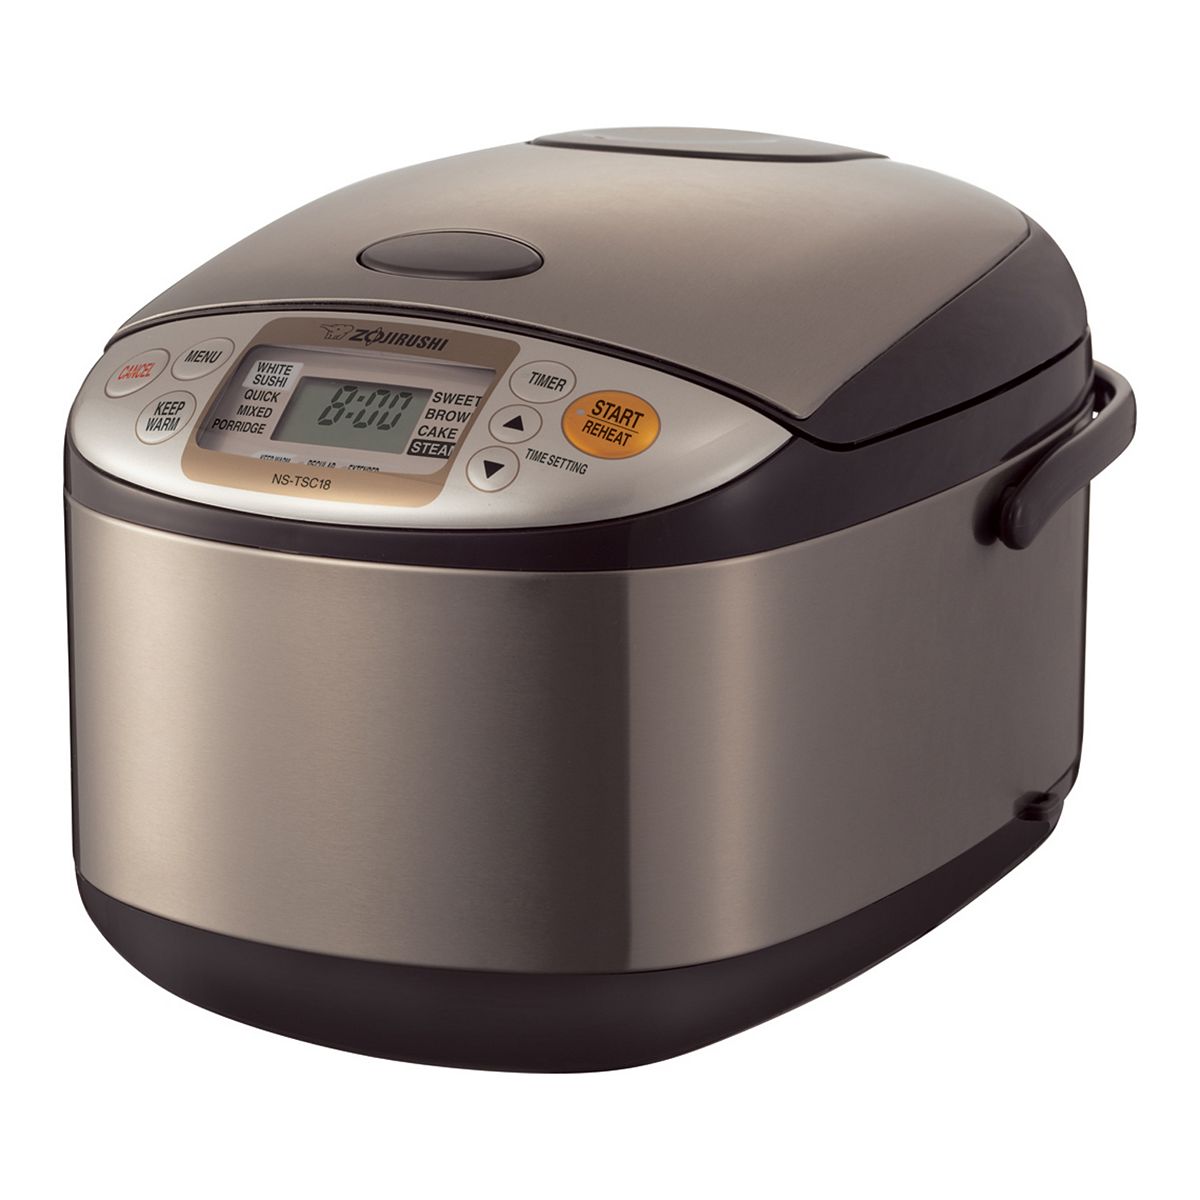 IMG_1096_resize, Sanyo 10-cup Rice cooker $8, charlie_zx